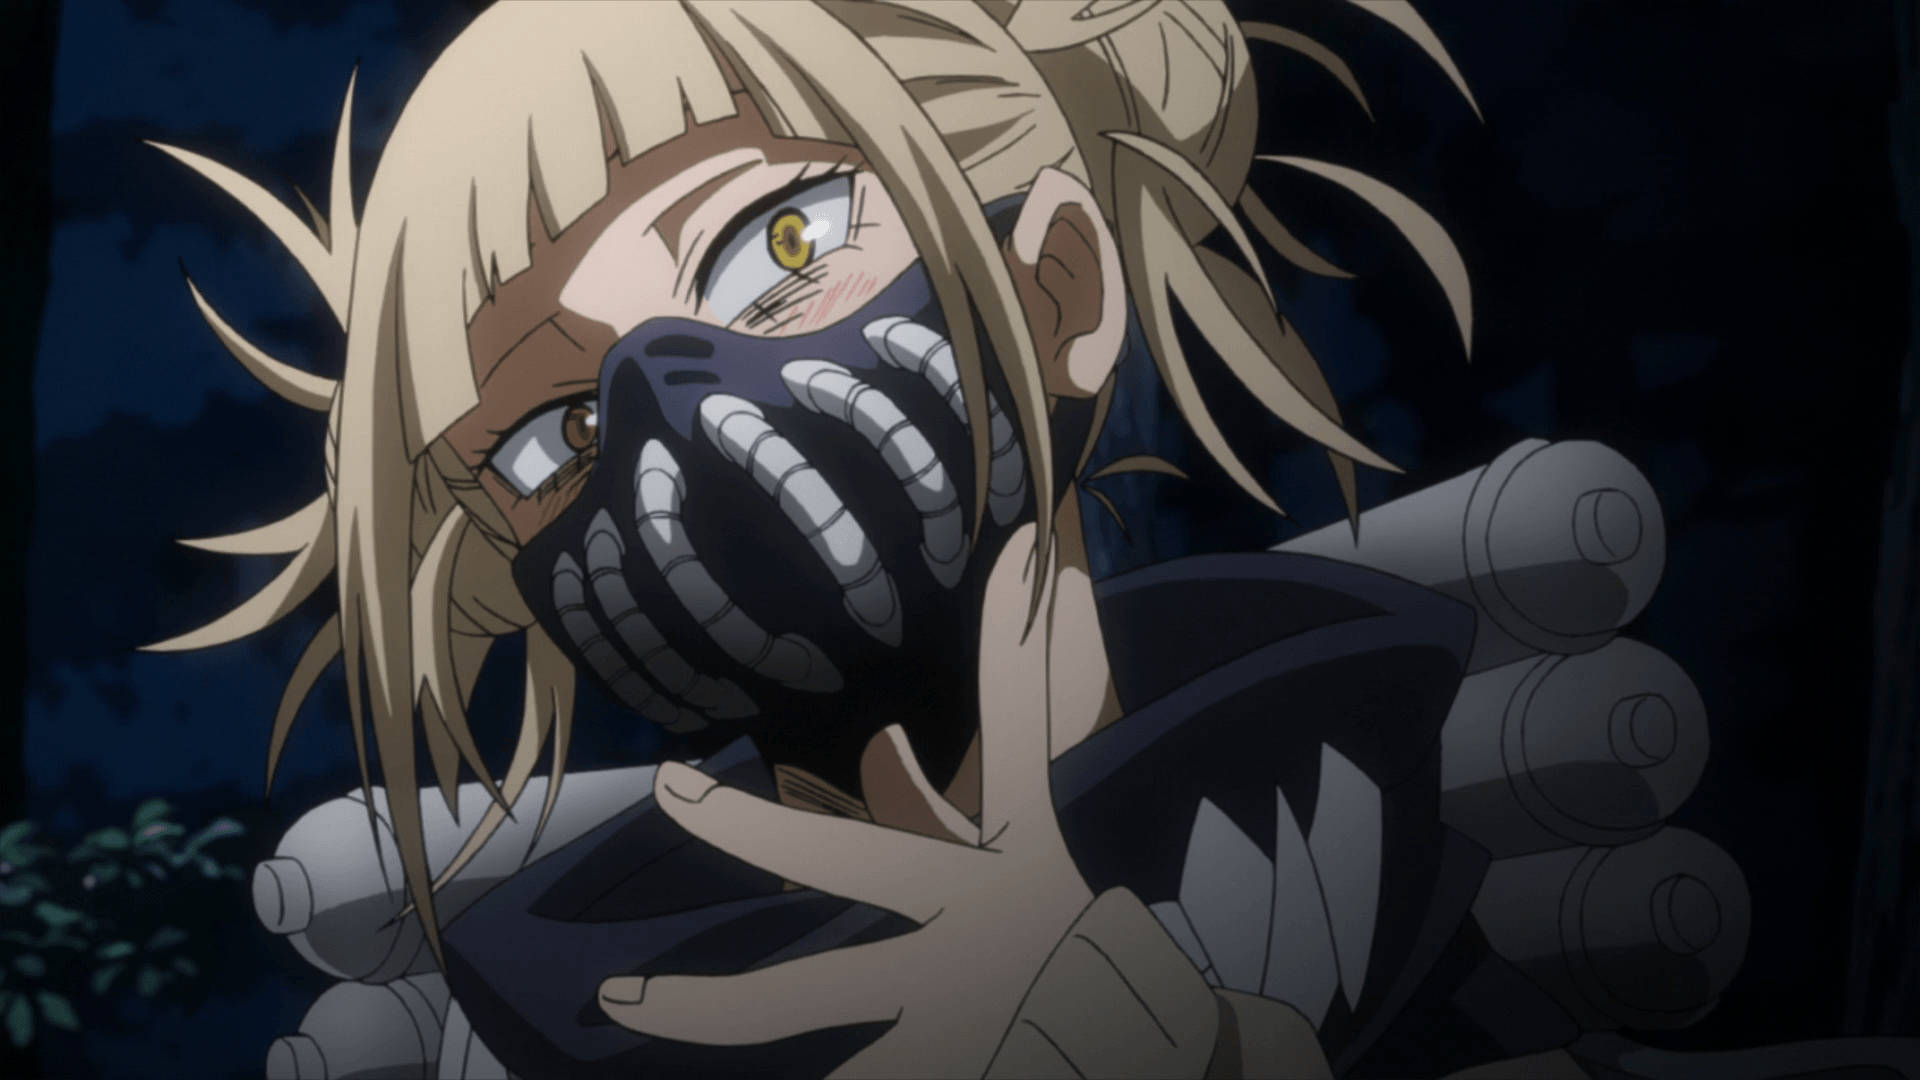 Himiko Toga With A Mask Background